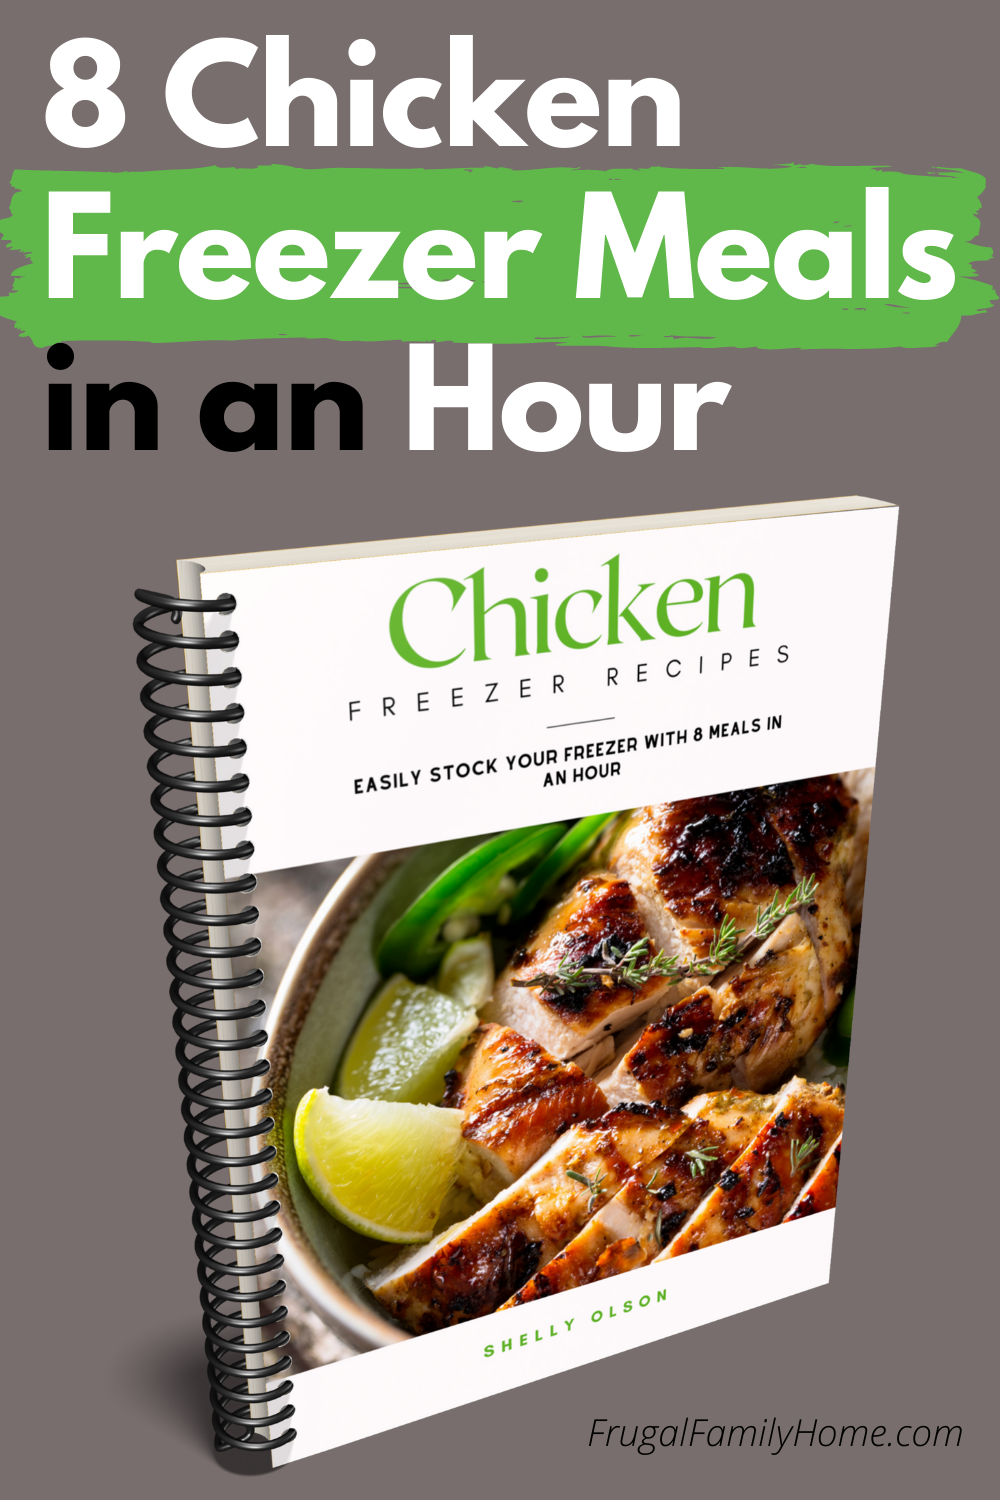 Chicken Freezer Meals - Frugal Family Home